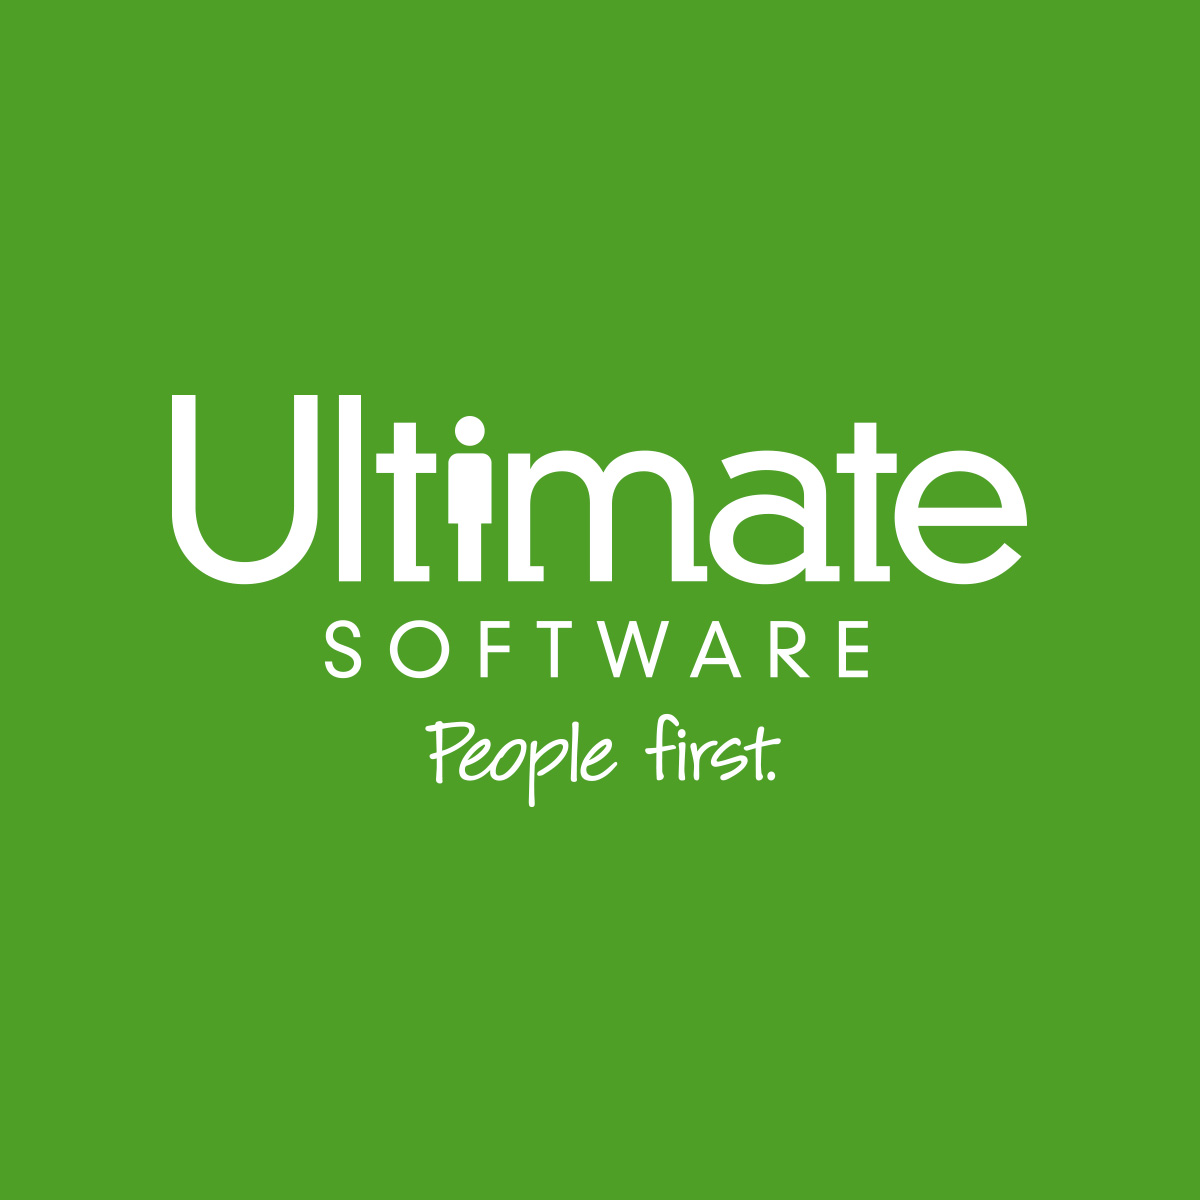 ultimate_software_green_white_1200x1200.